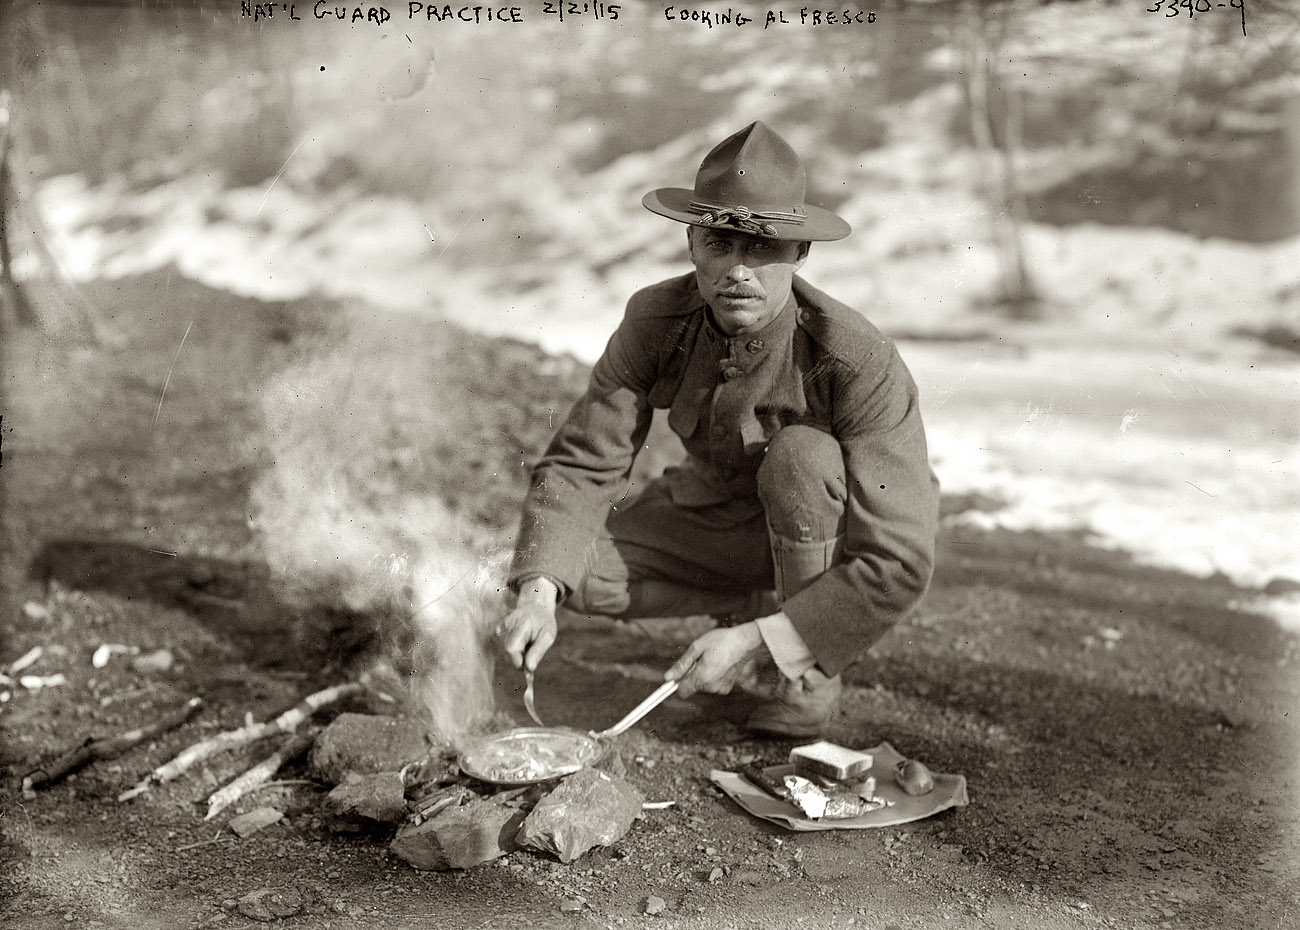 February 21, 1915. Peekskill, New York. "National Guard practice. Cooking alfresco." 5x7 glass negative, George Grantham Bain Collection. View full size.